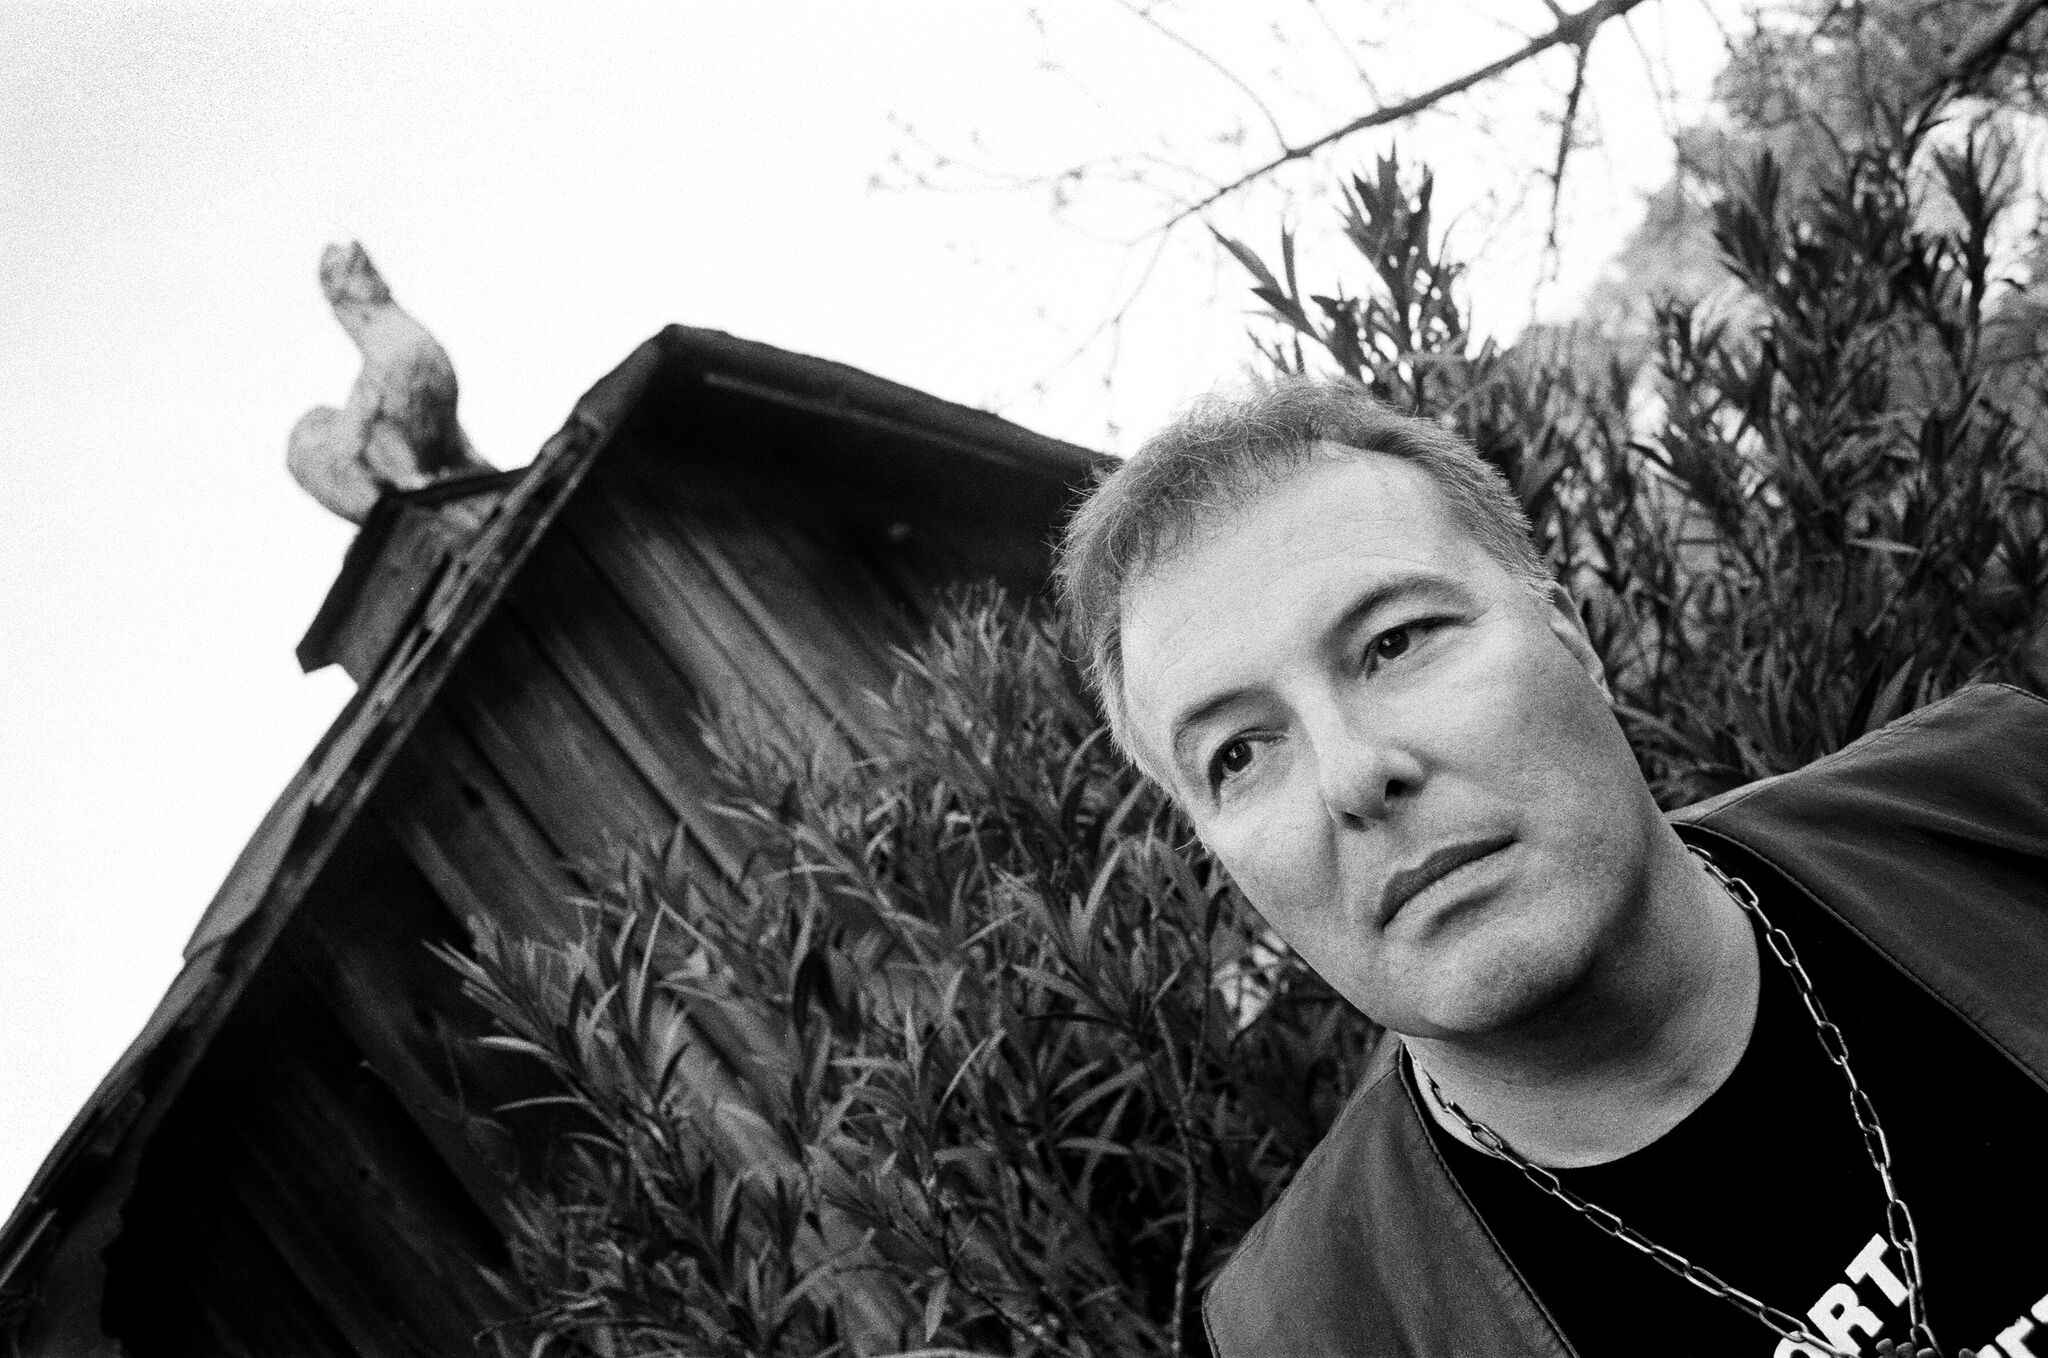 On Air Next: Jello Biafra on Fashion, Electronic Music, and “Terminal City Ricochet.”